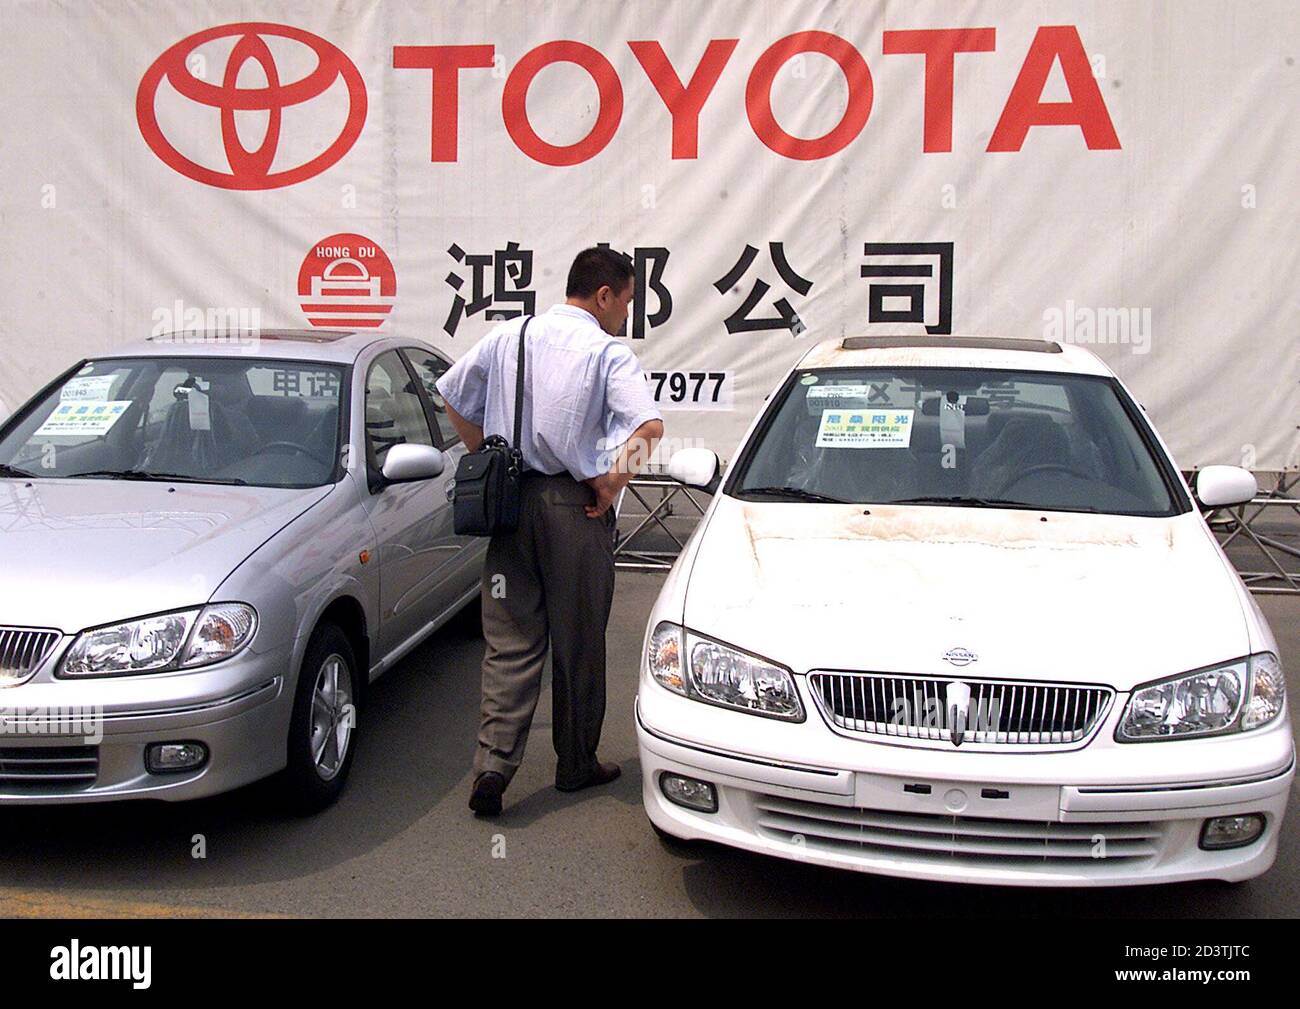 A Chinese man looks at a Japanese-made Toyota car at an outdoor auto market  in Beijing June 22, 2001. Japan and China dug in their heels in an  escalating trade war between